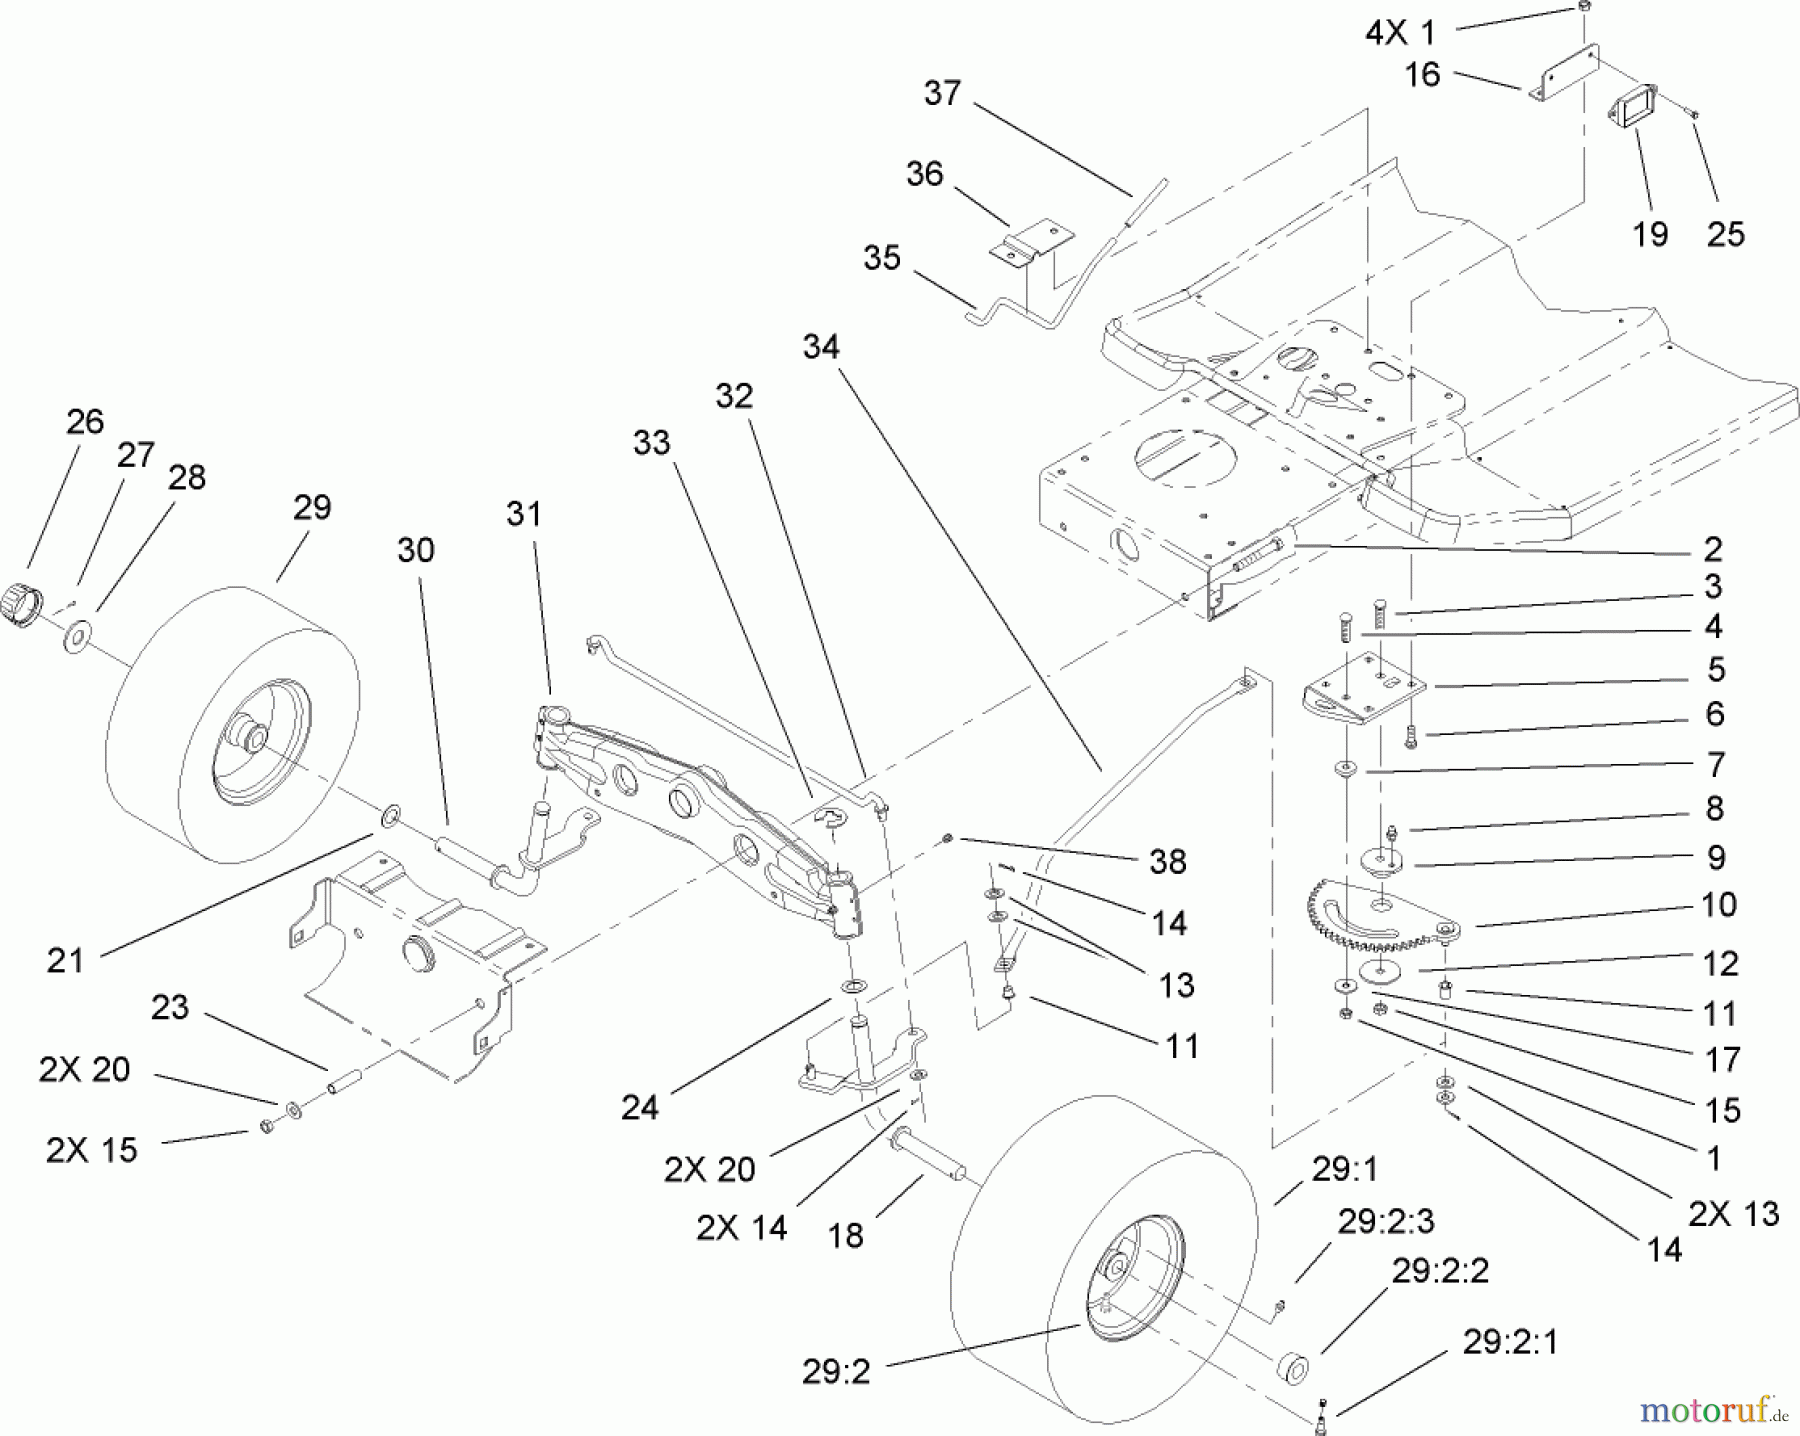  Toro Neu Mowers, Lawn & Garden Tractor Seite 1 71209 (XL 320) - Toro XL 320 Lawn Tractor, 2005 (250005001-250999999) STEERING COMPONENT ASSEMBLY